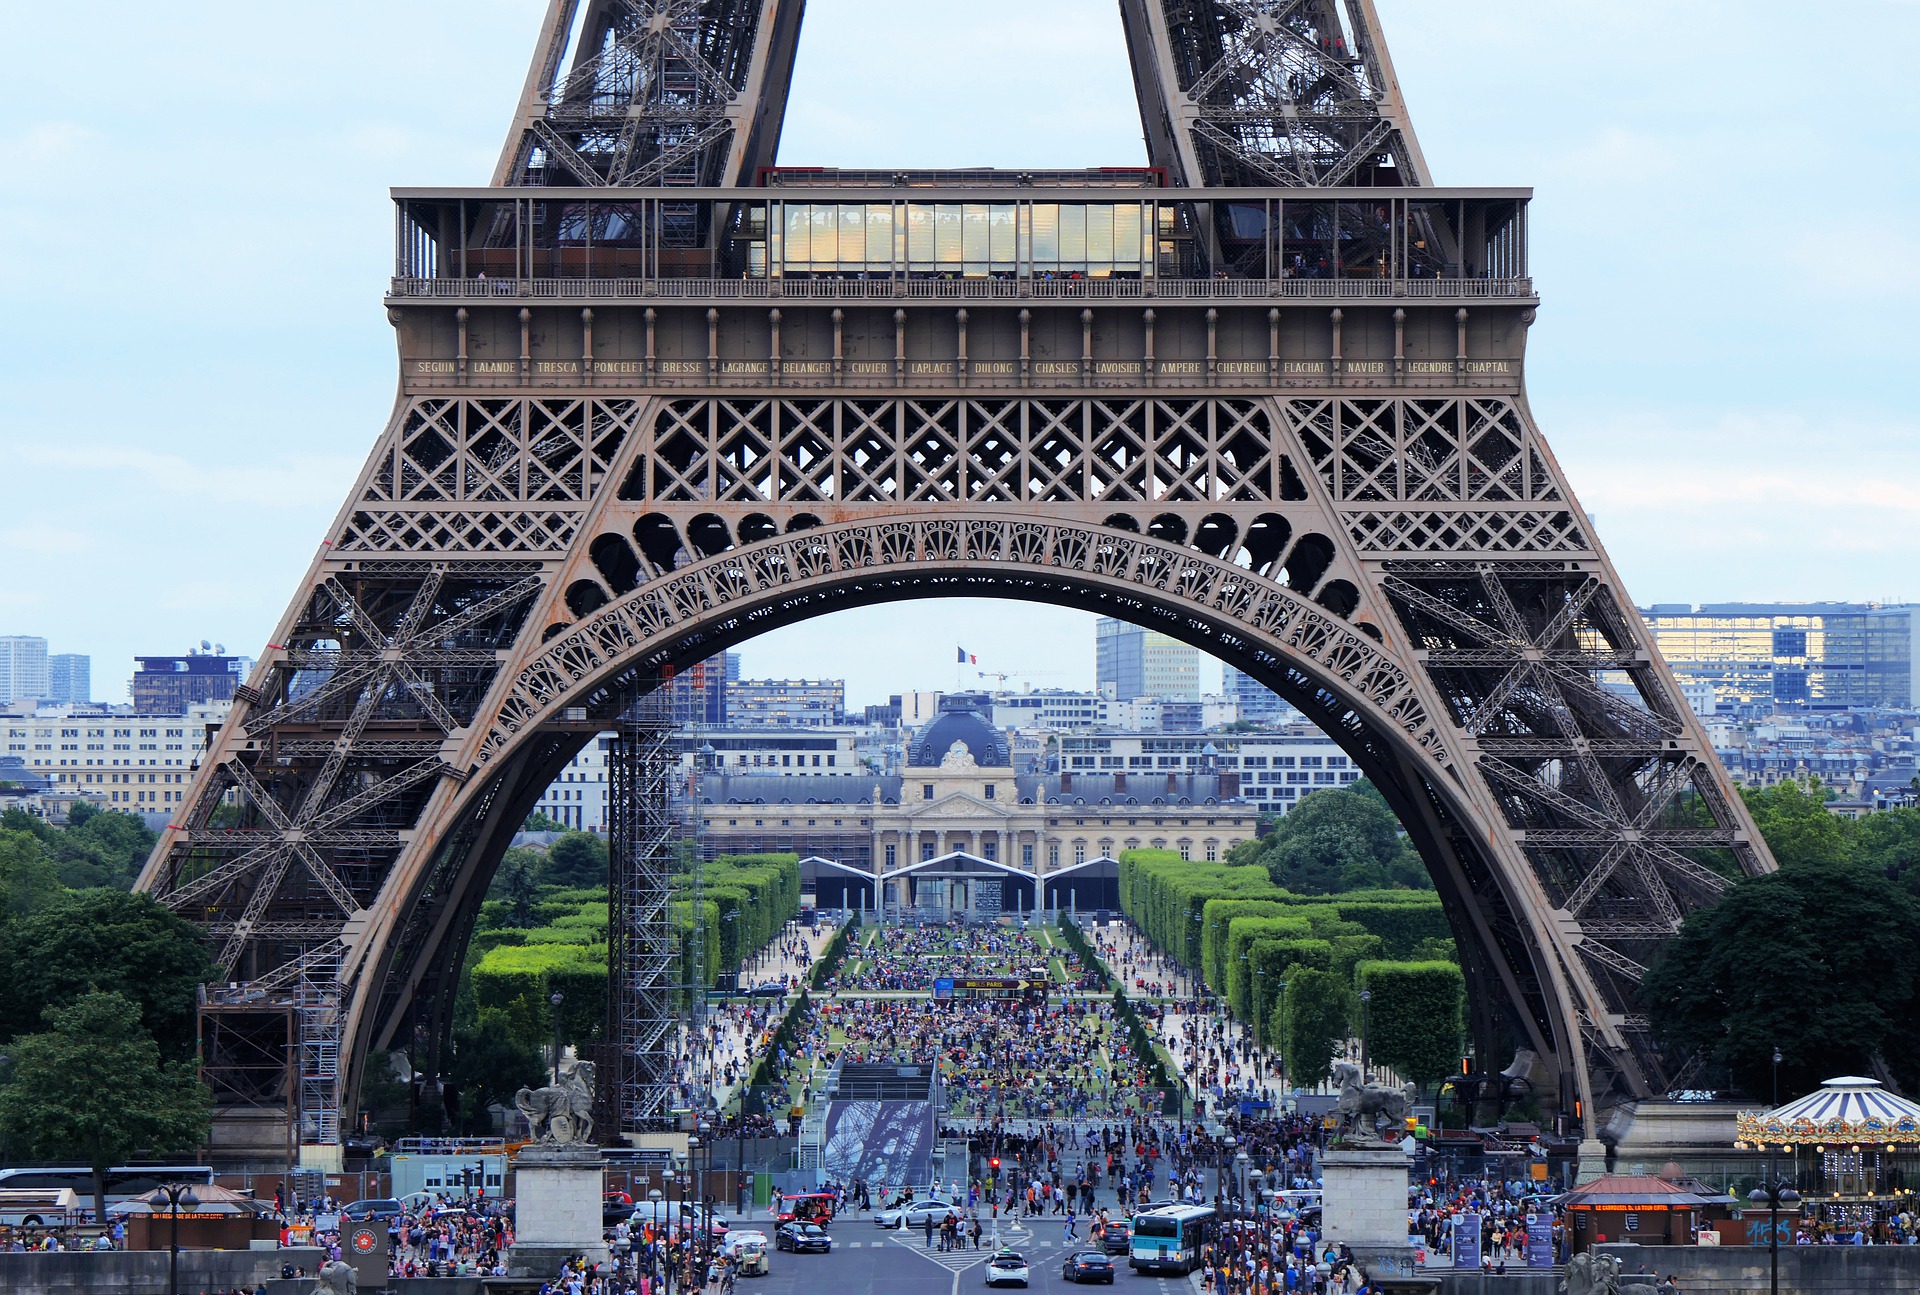 Crowds of people under the Eiffel Tower